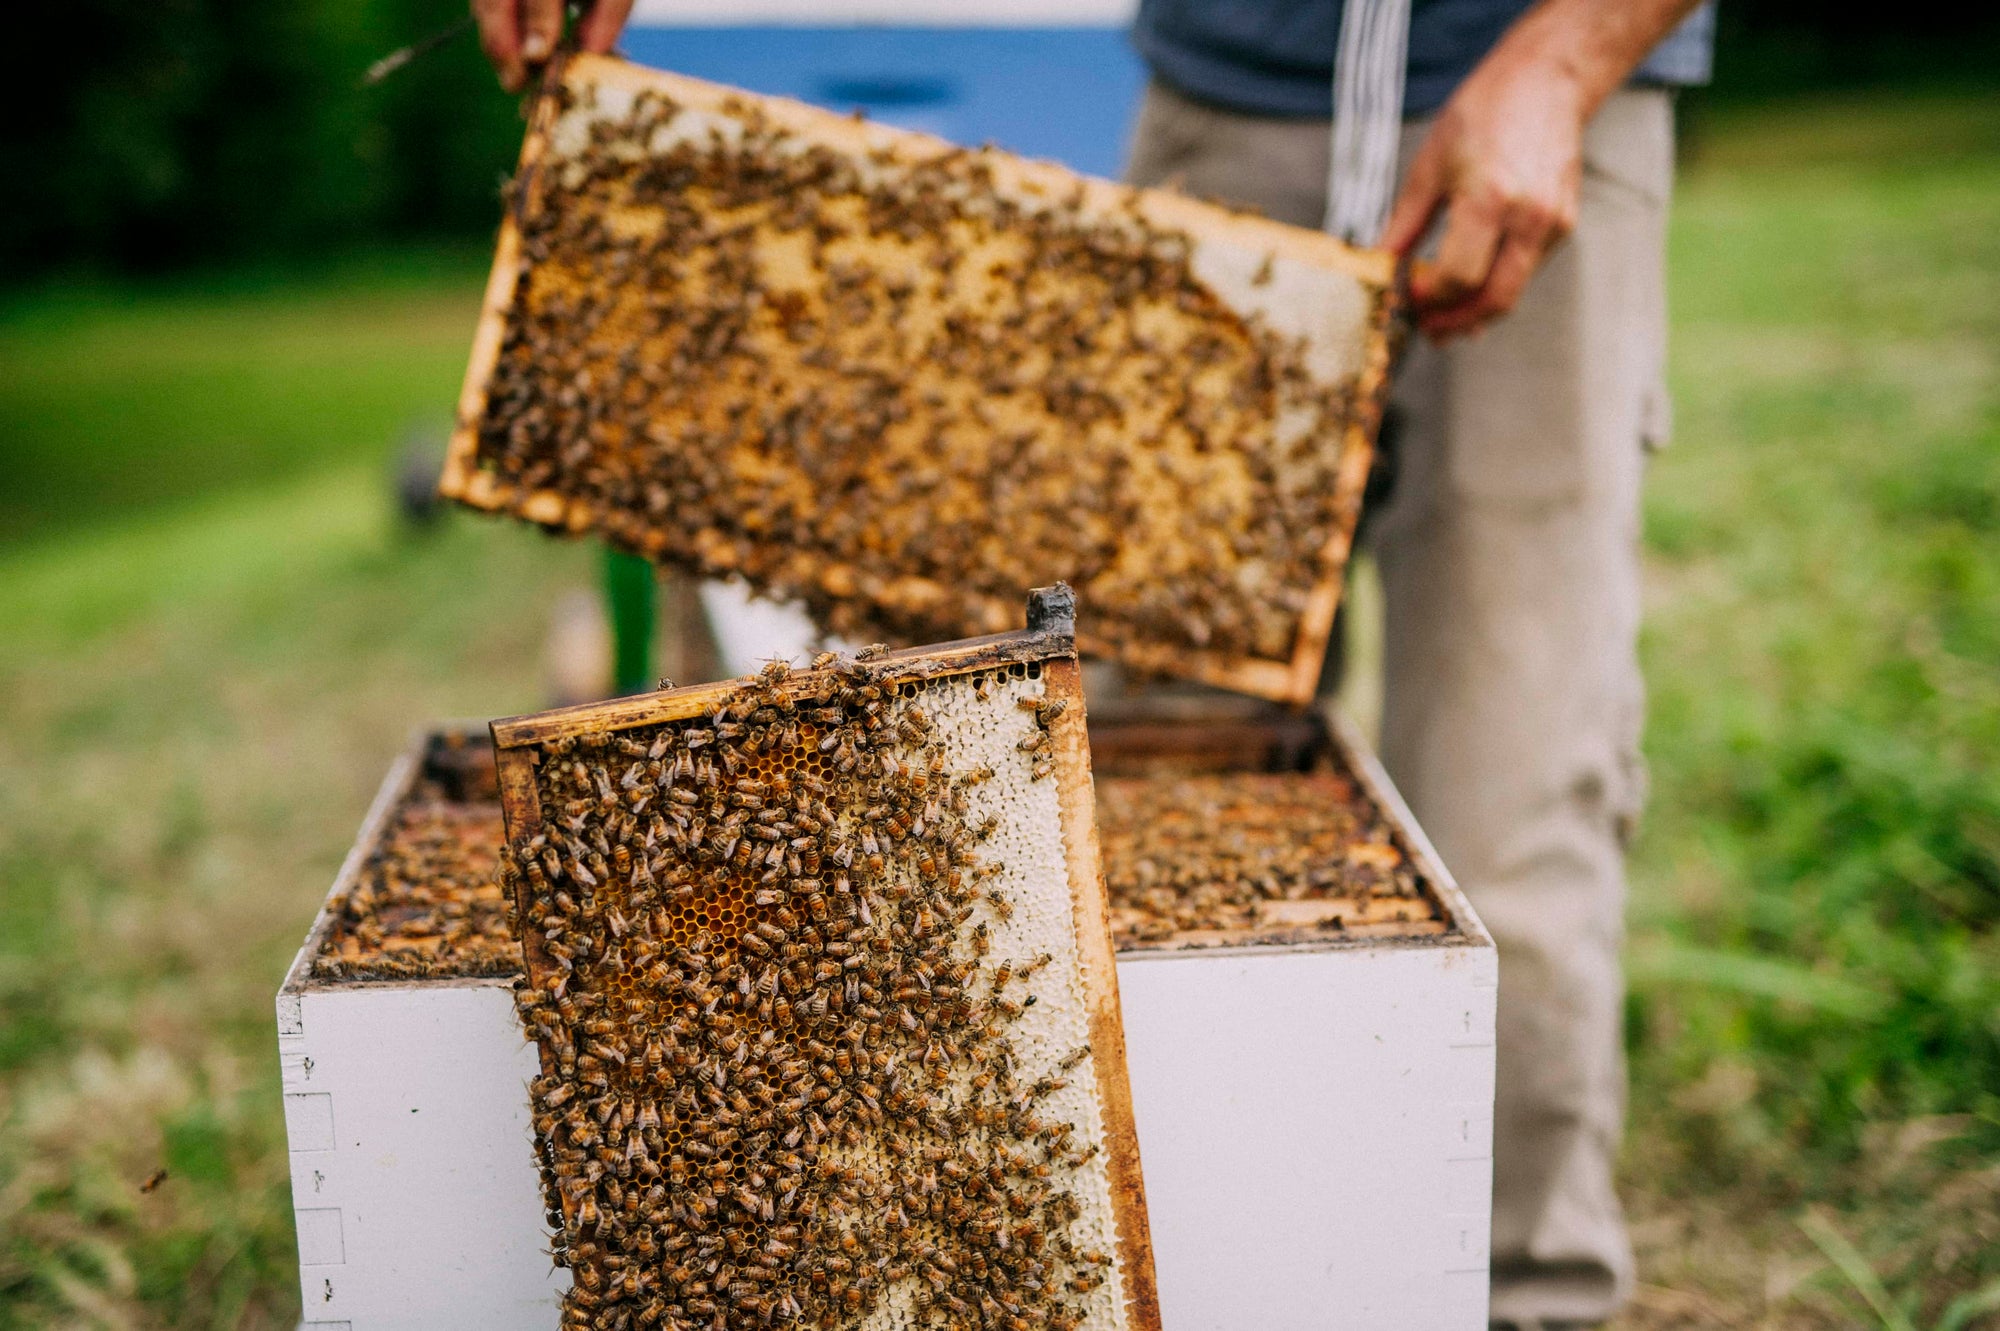 Raw honey, Processed honey - What's the Difference?